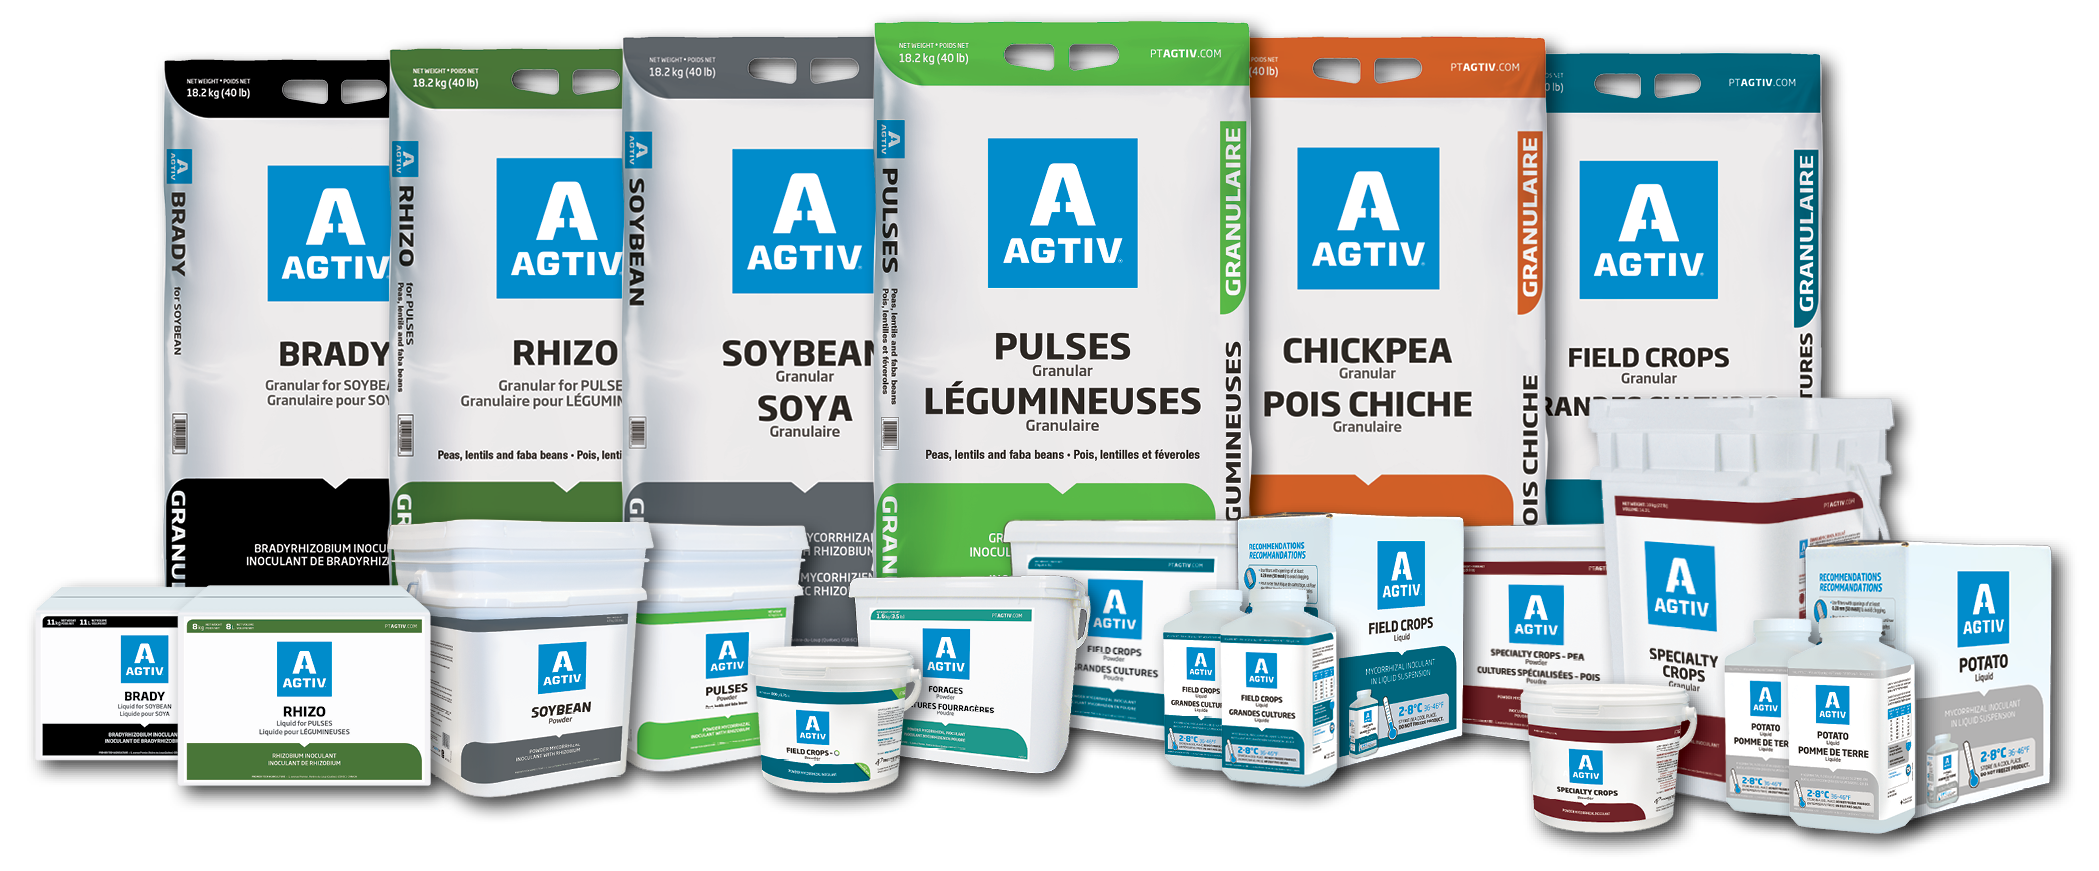 Complete AGTIV product offer with mycorrhizae and rhizobium